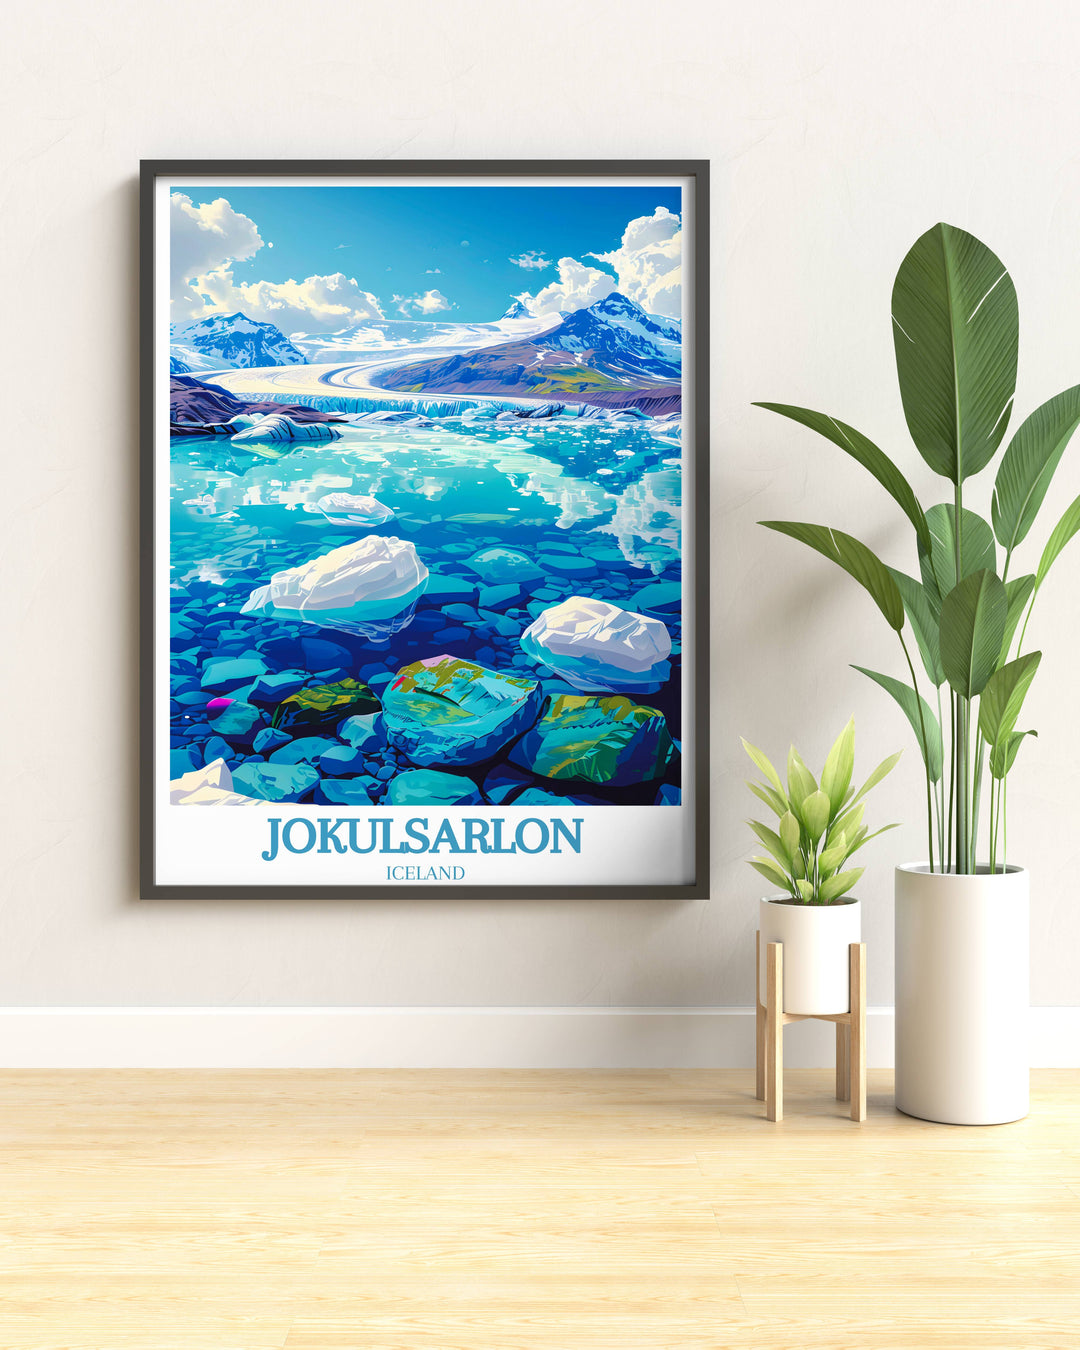 Capture the essence of Jokulsarlon Glacier Lagoon with this travel print, an ideal housewarming gift for nature lovers